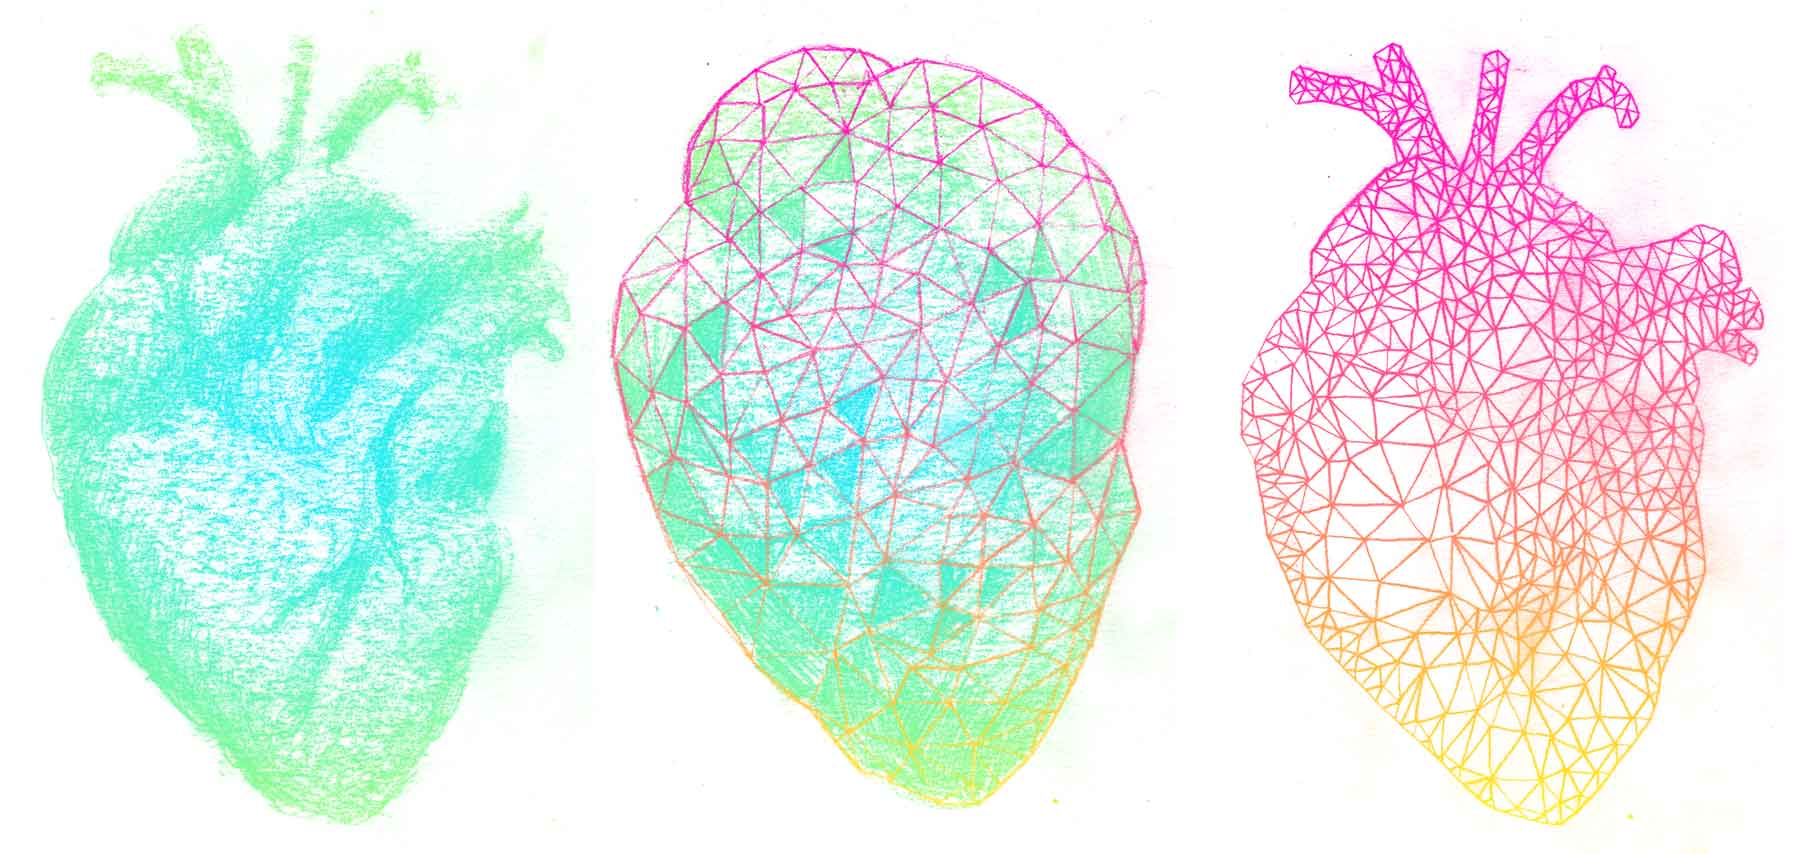 Three early iterations of the heart illustration used in the site design.